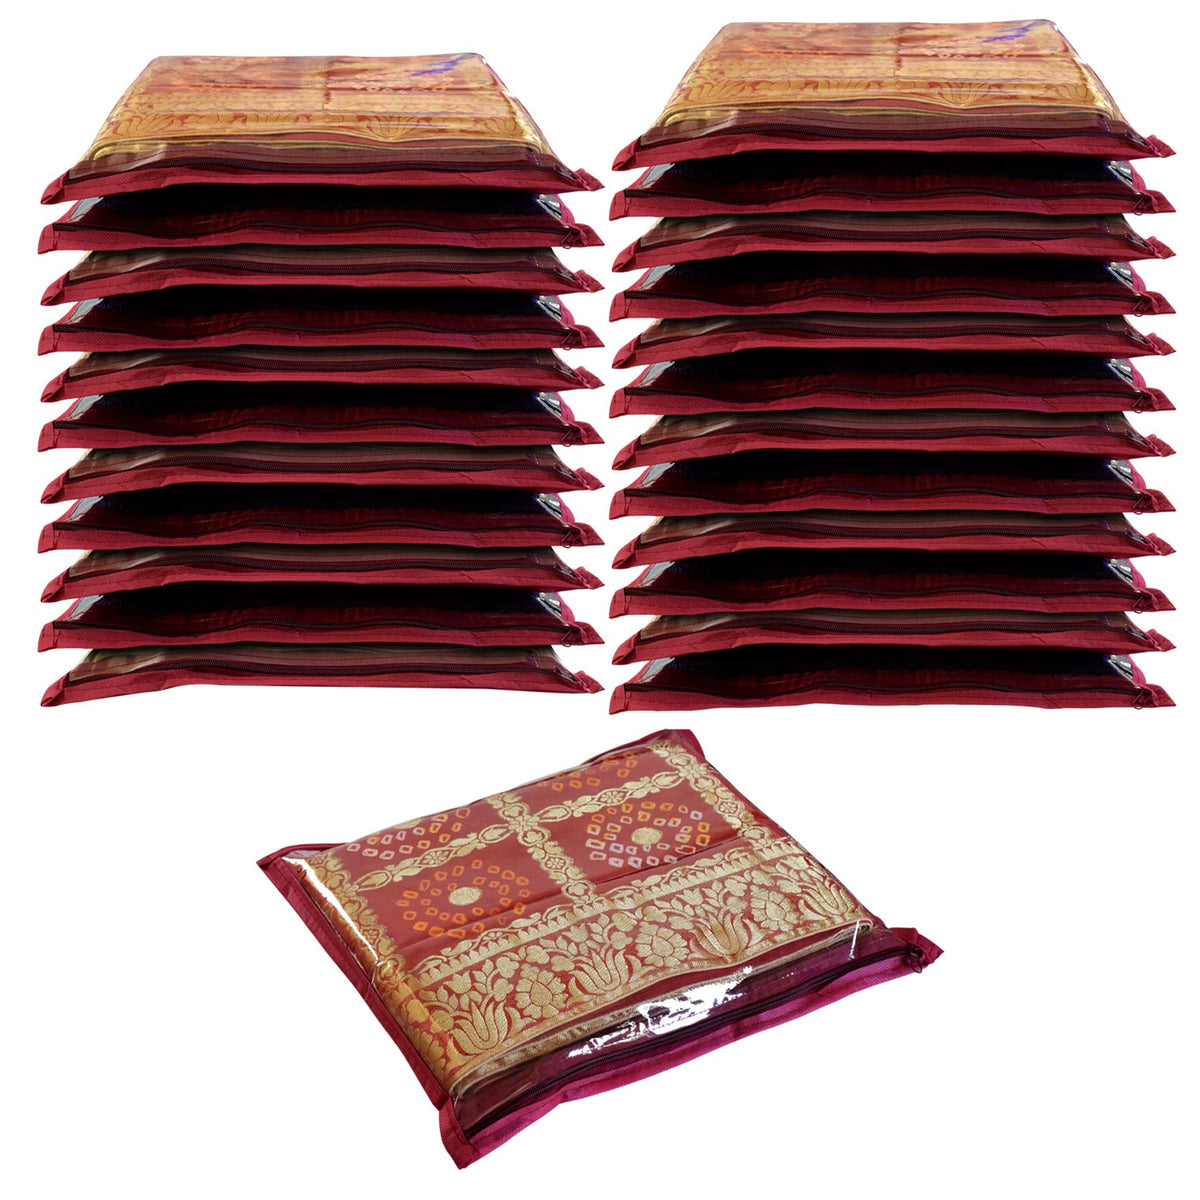 Kuber Industries Single Saree Covers With Zip|Saree Packing Covers For Wedding|Saree Cover Set Of 24 (Maroon)